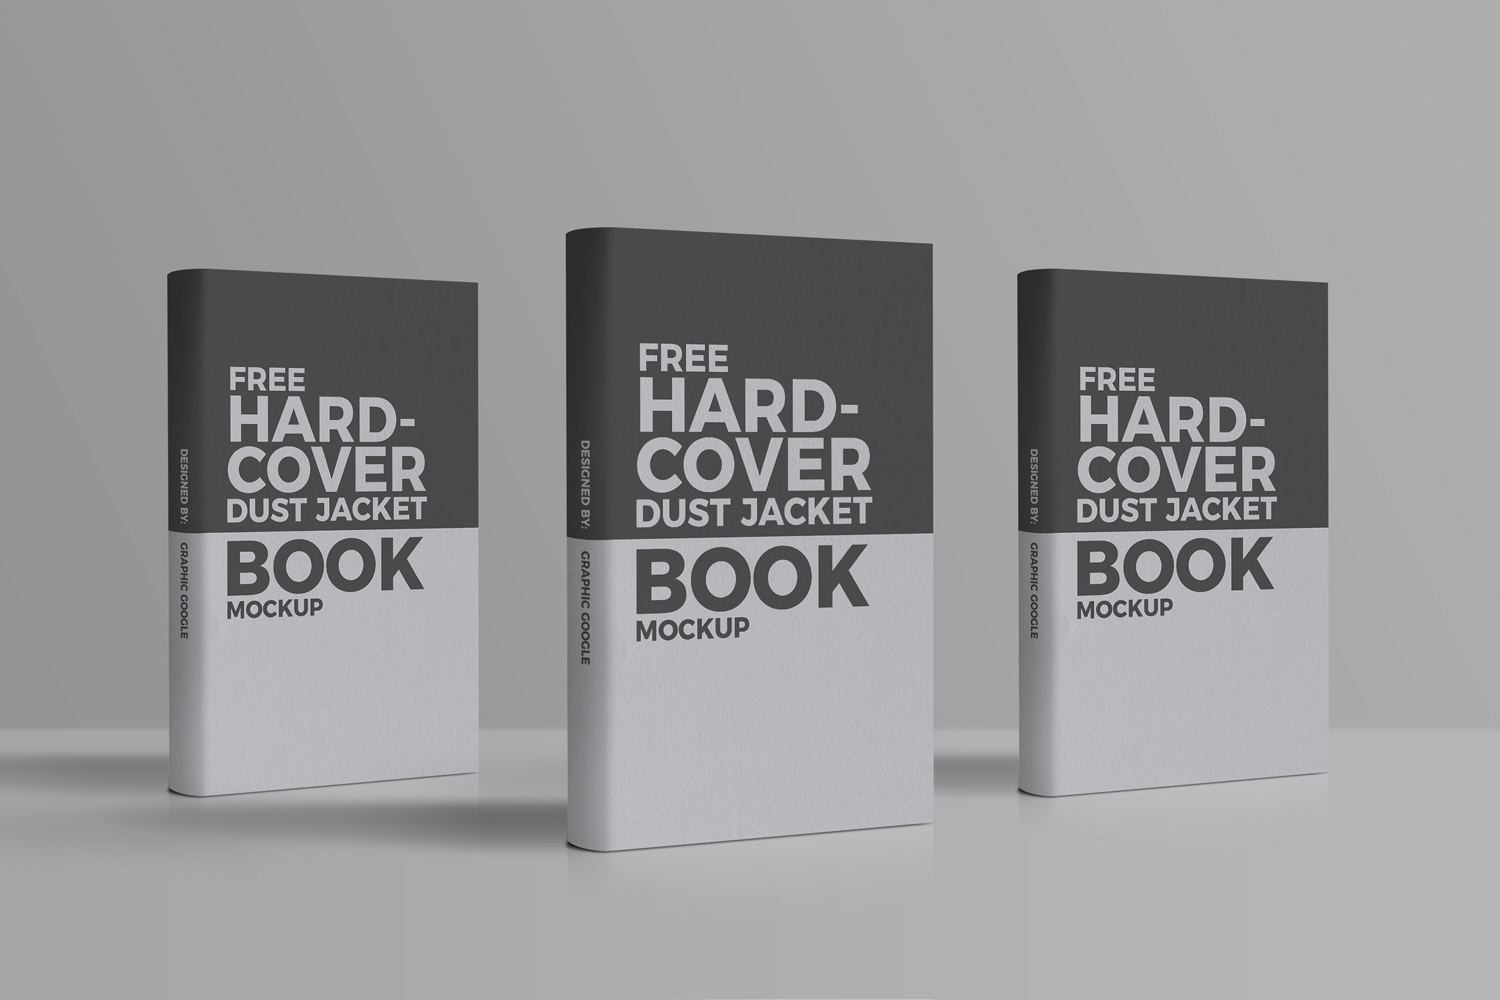 Free-Hardcover-Dust-Jacket-Book-Mockup-Preview-4